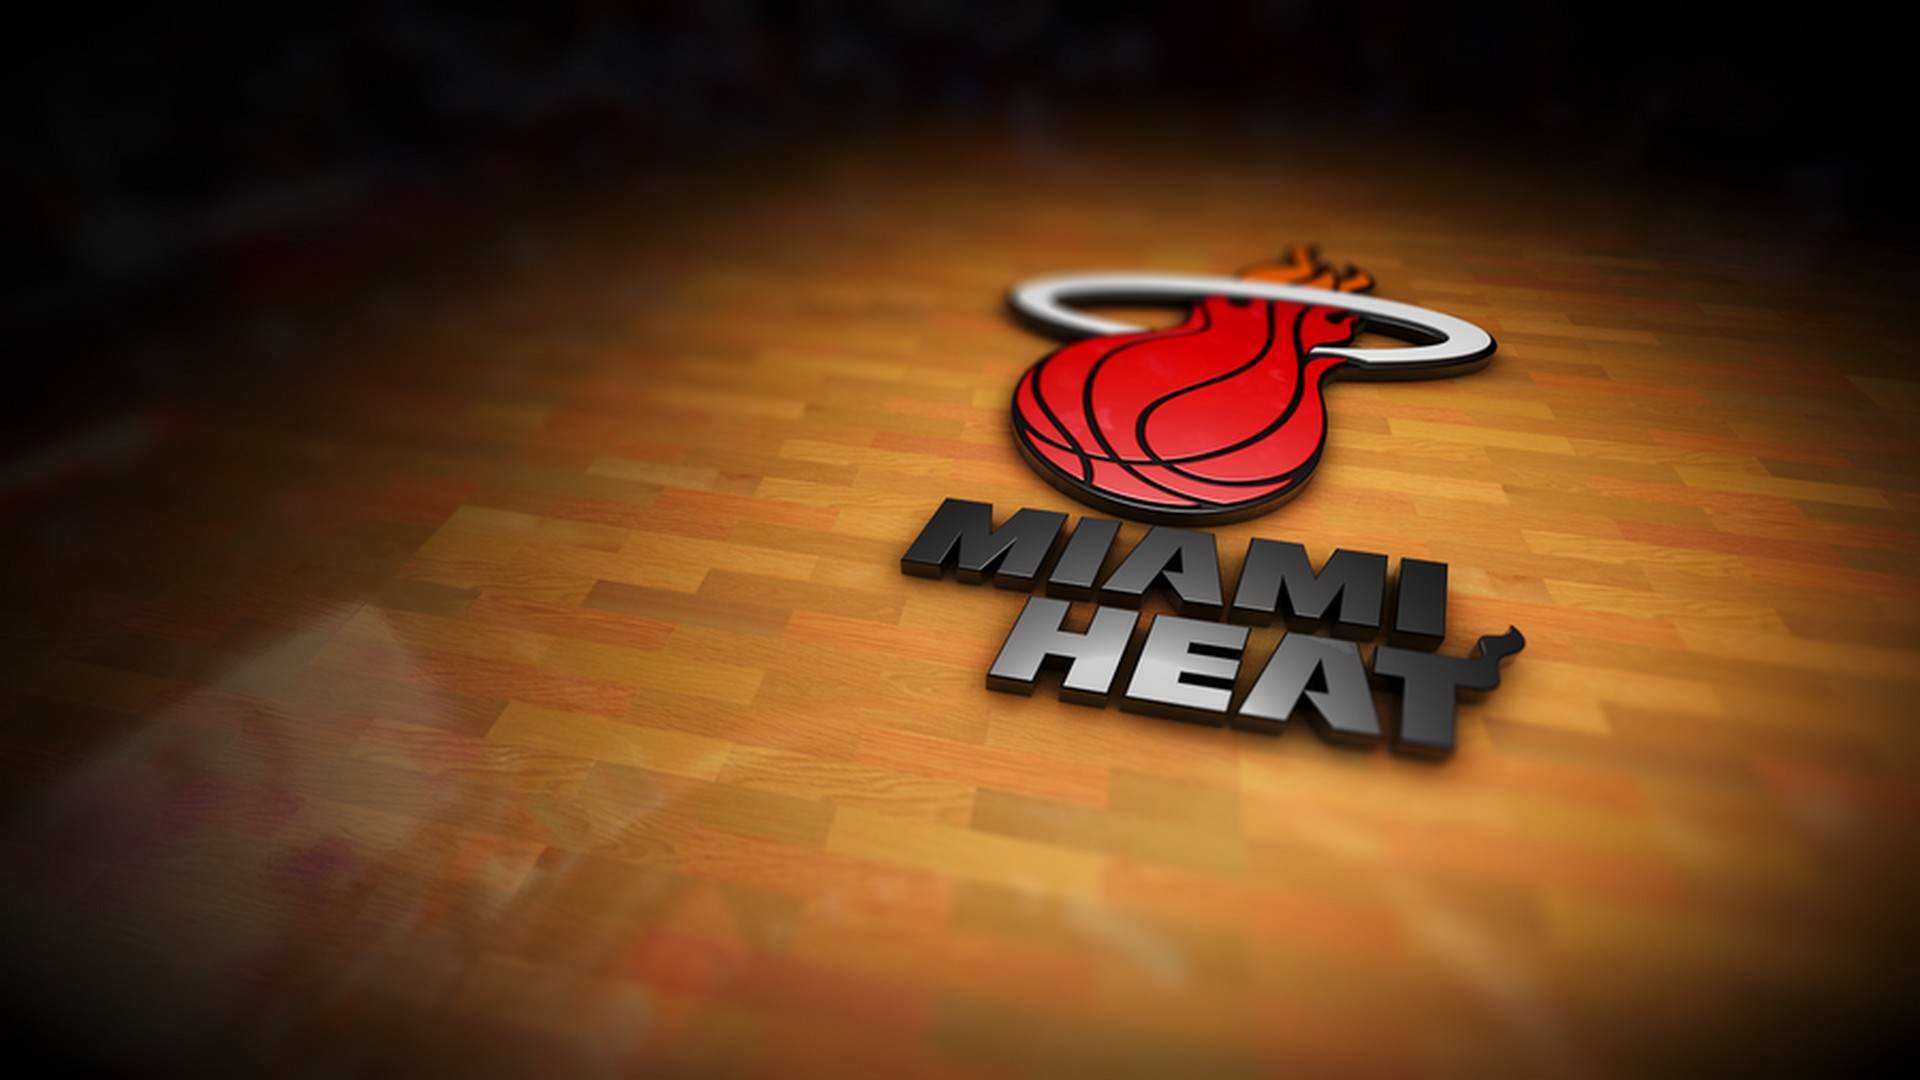 Miami Heat For Desktop Wallpaper with high-resolution 1920x1080 pixel. You can use this wallpaper for your Desktop Computer Backgrounds, Windows or Mac Screensavers, iPhone Lock screen, Tablet or Android and another Mobile Phone device